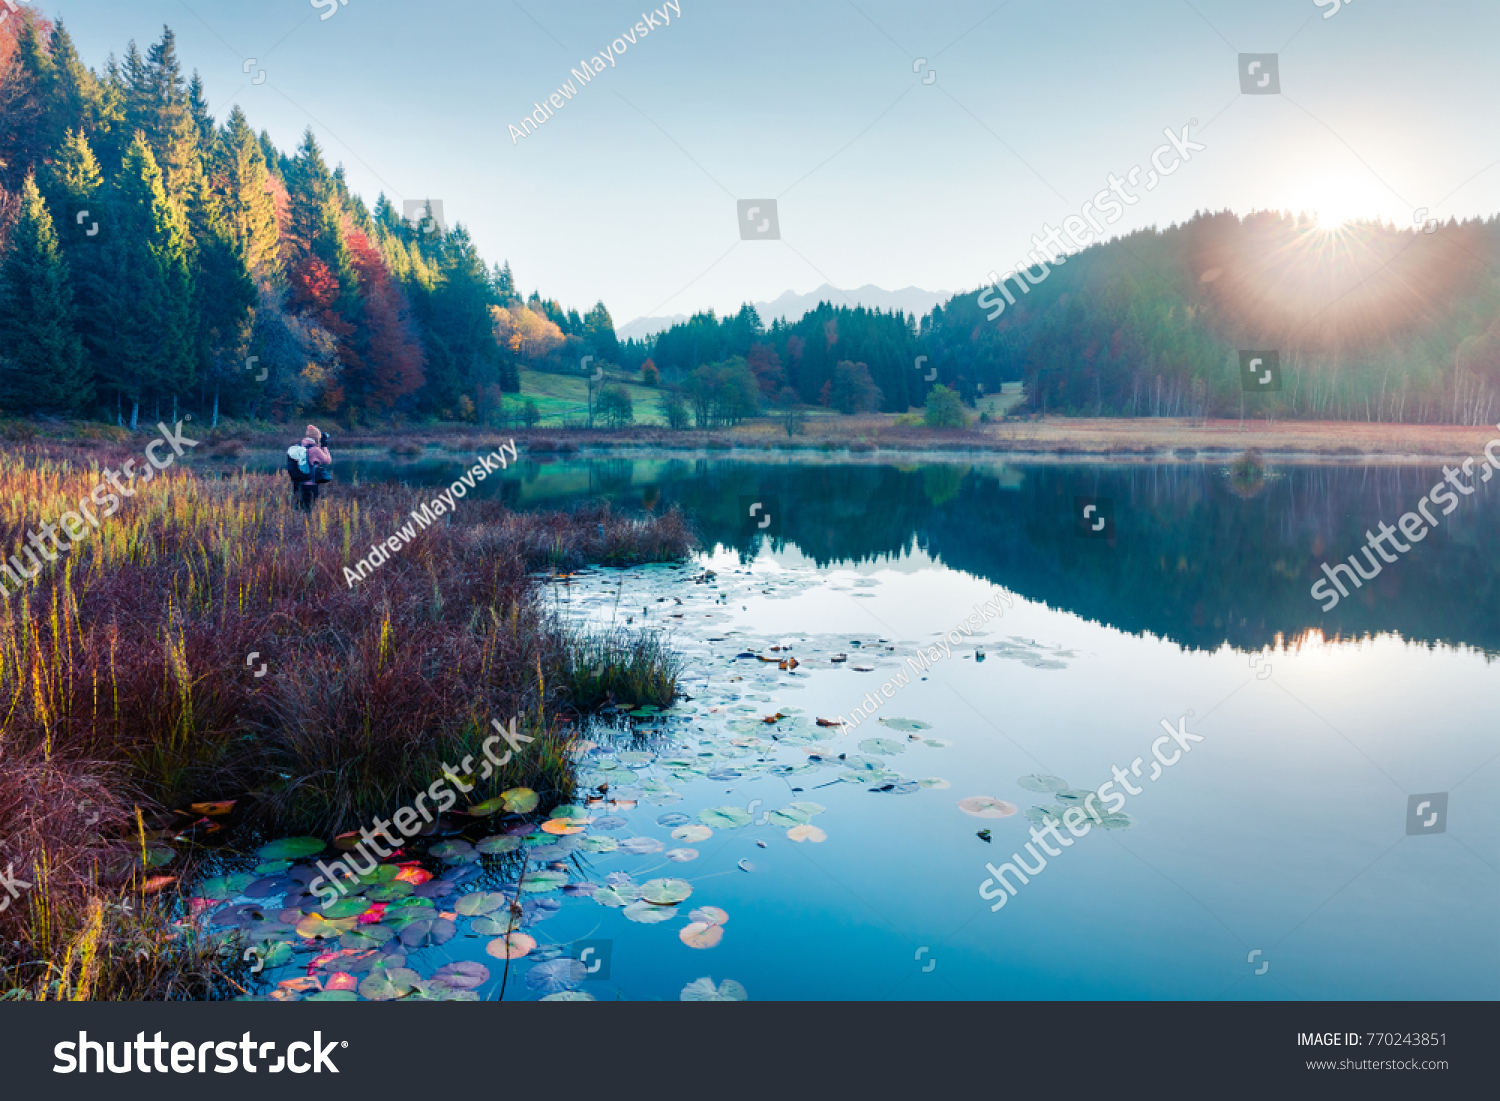 Misty morning scene of Wagenbruchsee lake. Photographer takes pictures of beautifel autumn view of Bavarian Alps, Germany, Europe. Traveling concept background.
 #770243851